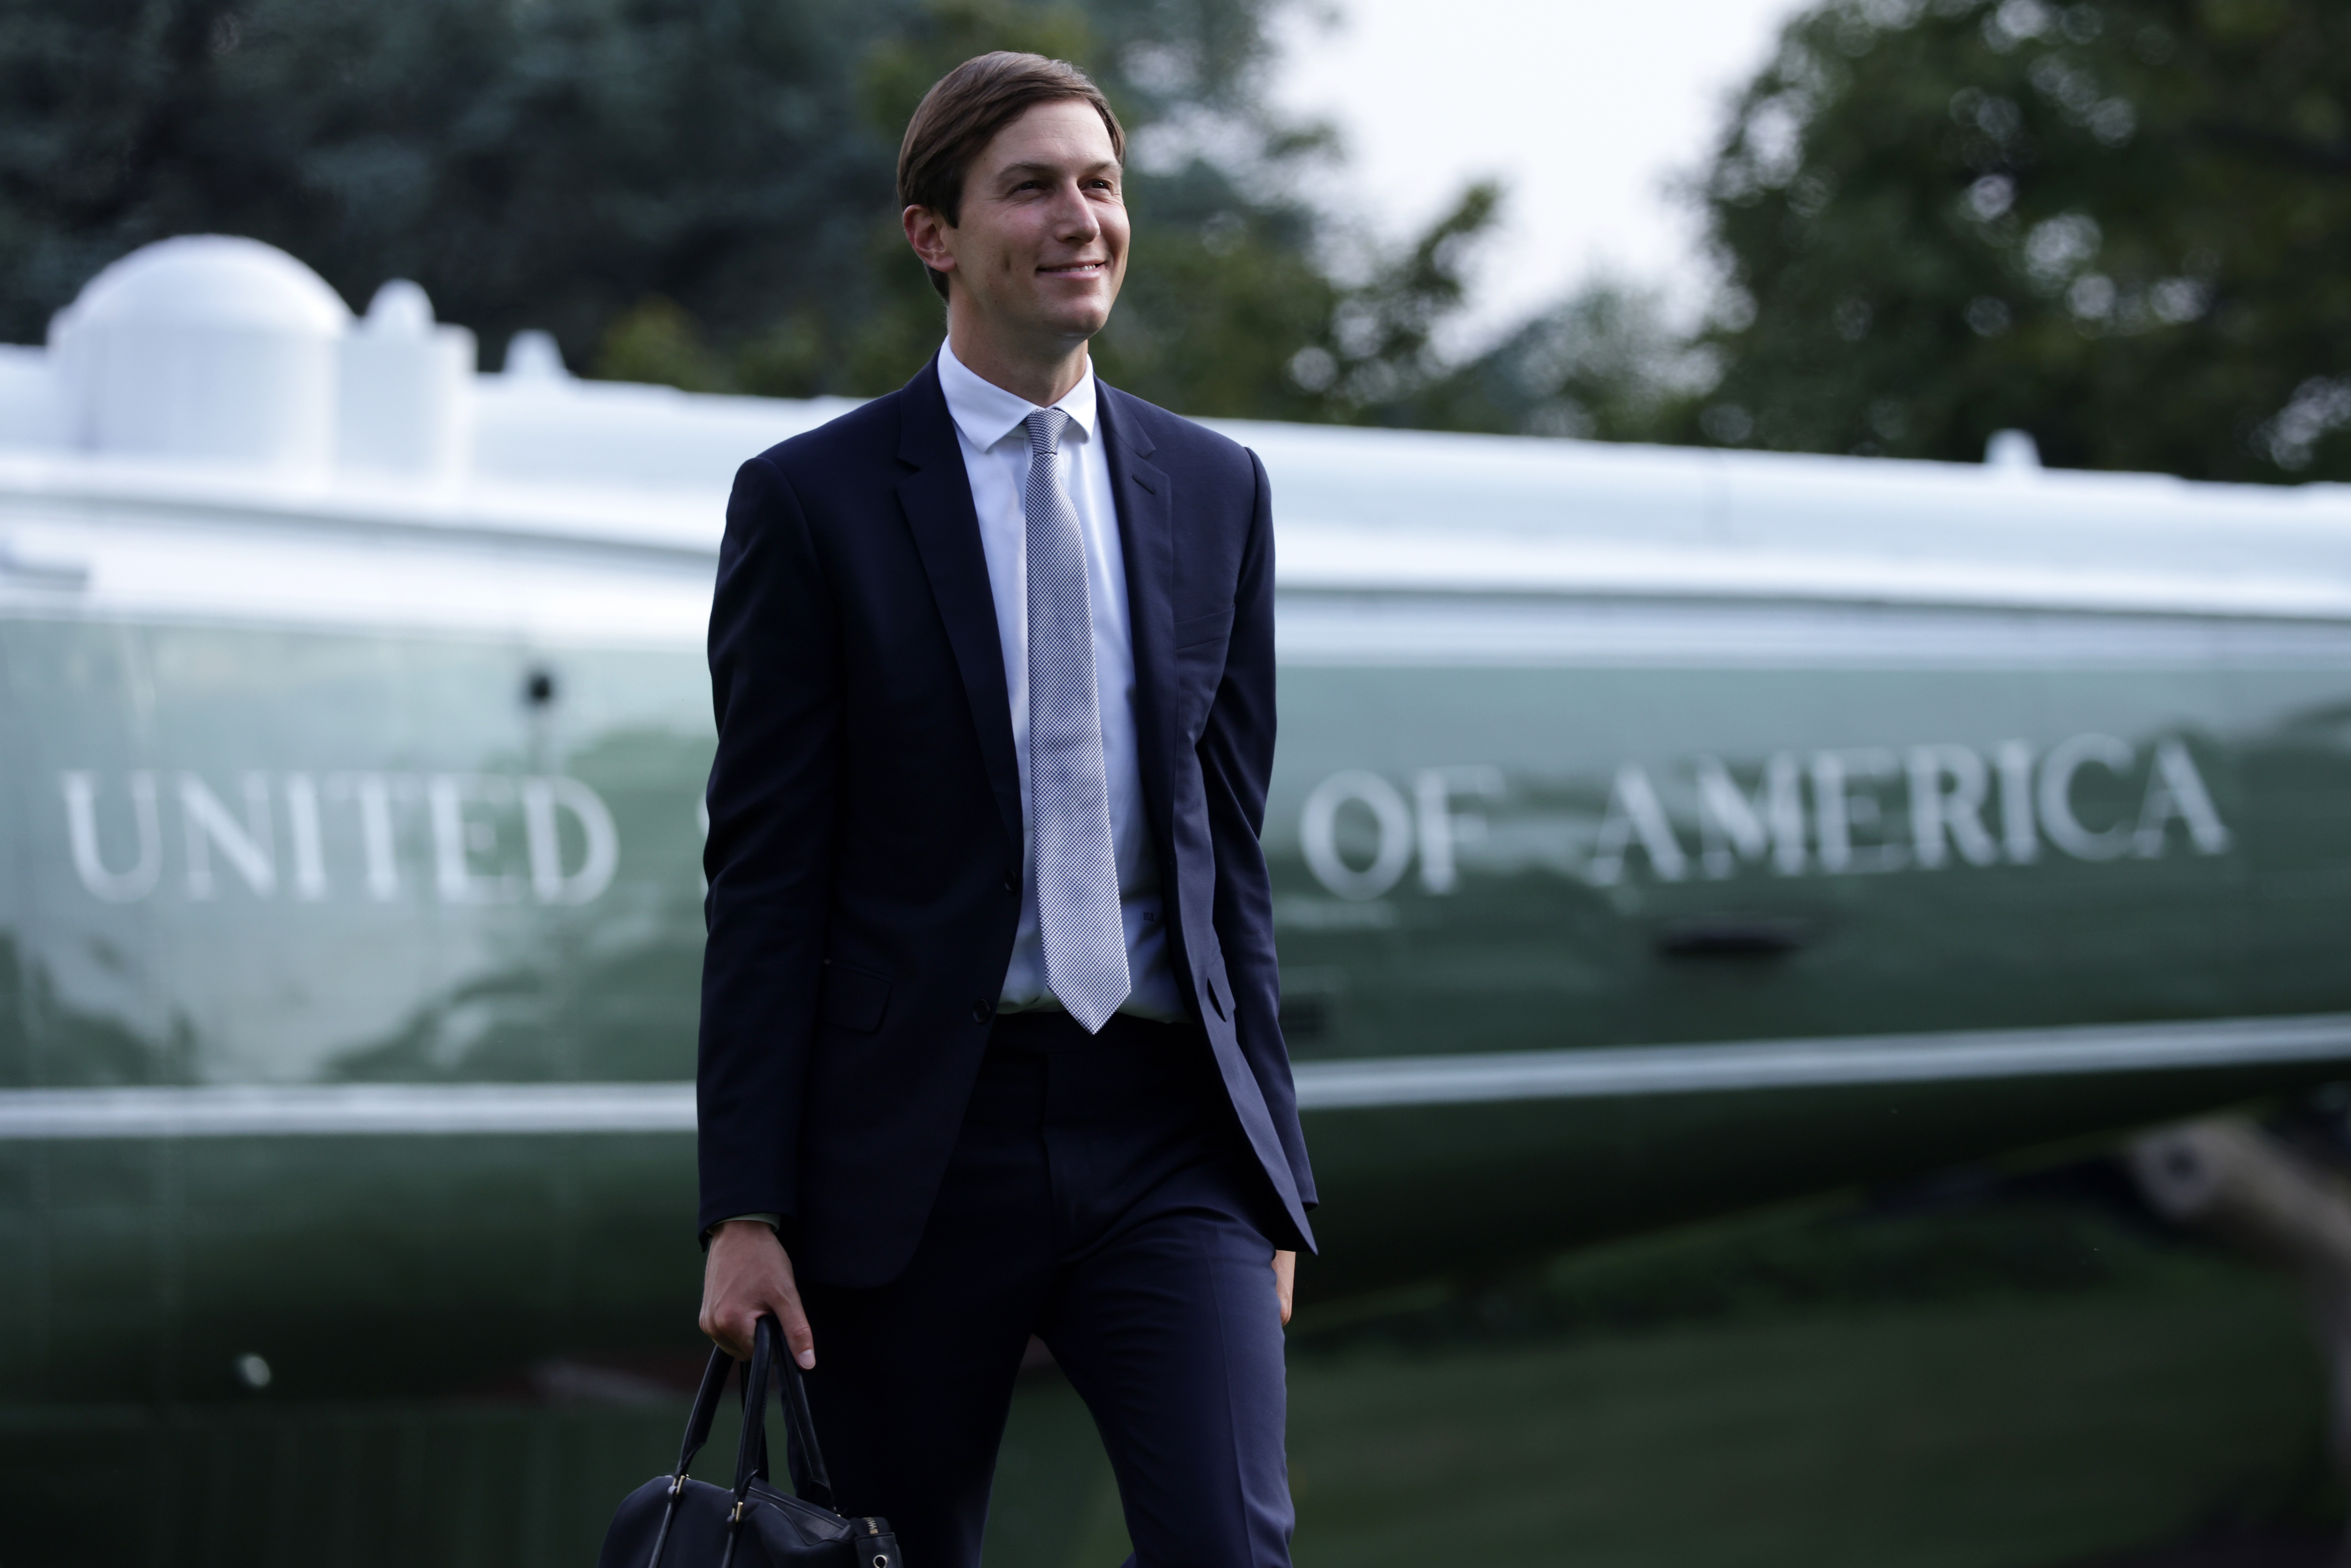 WASHINGTON, DC - JULY 27: White House senior adviser Jared Kushner walks on the South Lawn after landing aboard Marine One at the White House from a trip with President Donald Trump July 27, 2020 in Washington, DC. Trump was returning from a visit to the FUJIFILM Diosynth Biotechnologies' Innovation Center in Morrisville, North Carolina, a facility that supports manufacturing of key components of a COVID-19 vaccine candidate developed by Novavax. (Photo by Alex Wong/Getty Images)